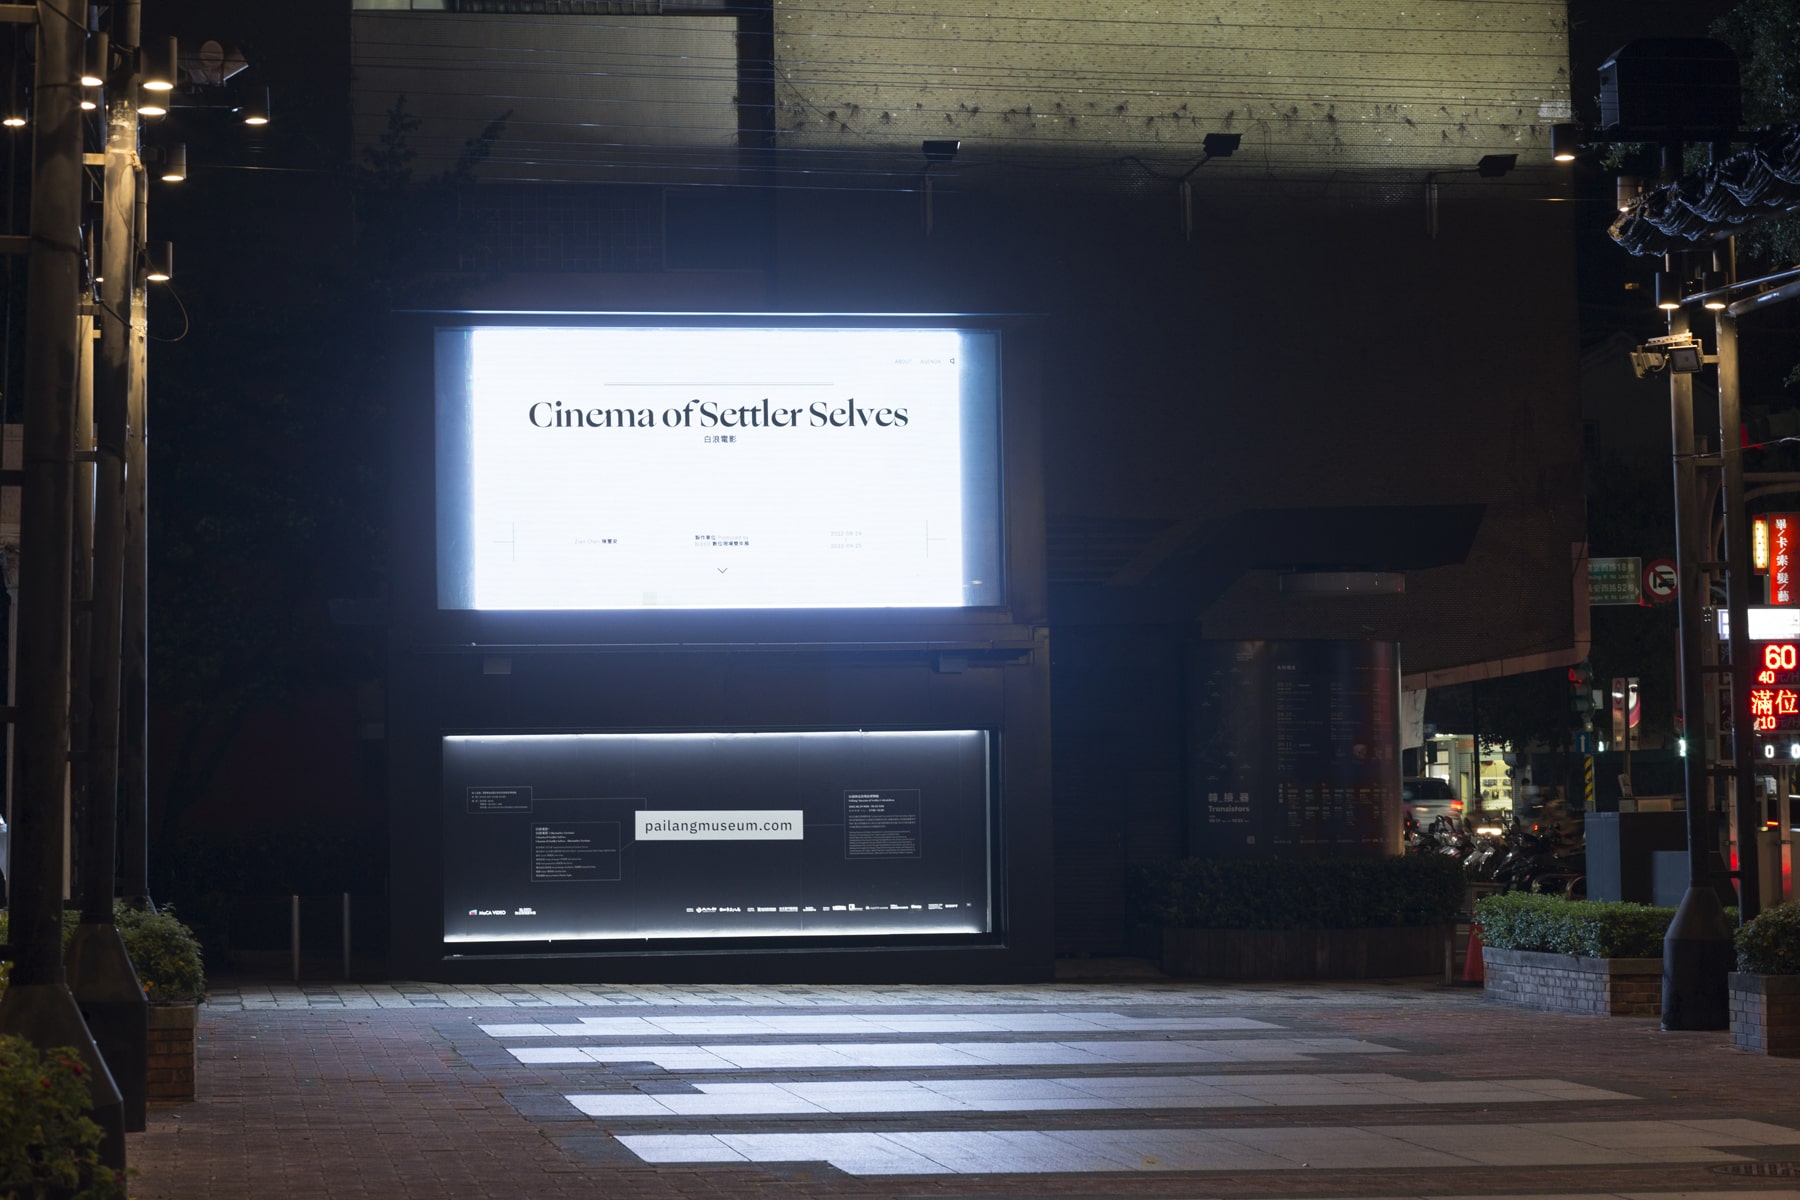 At night, In front of the plaza in downtown Taipei, a giant LED screen is playing a video artwork by Taiwanese artist Wu Chi-Yu’ video artwork titled “Cinema of Settler Selves” displayed on the screen with black characters on a white background.